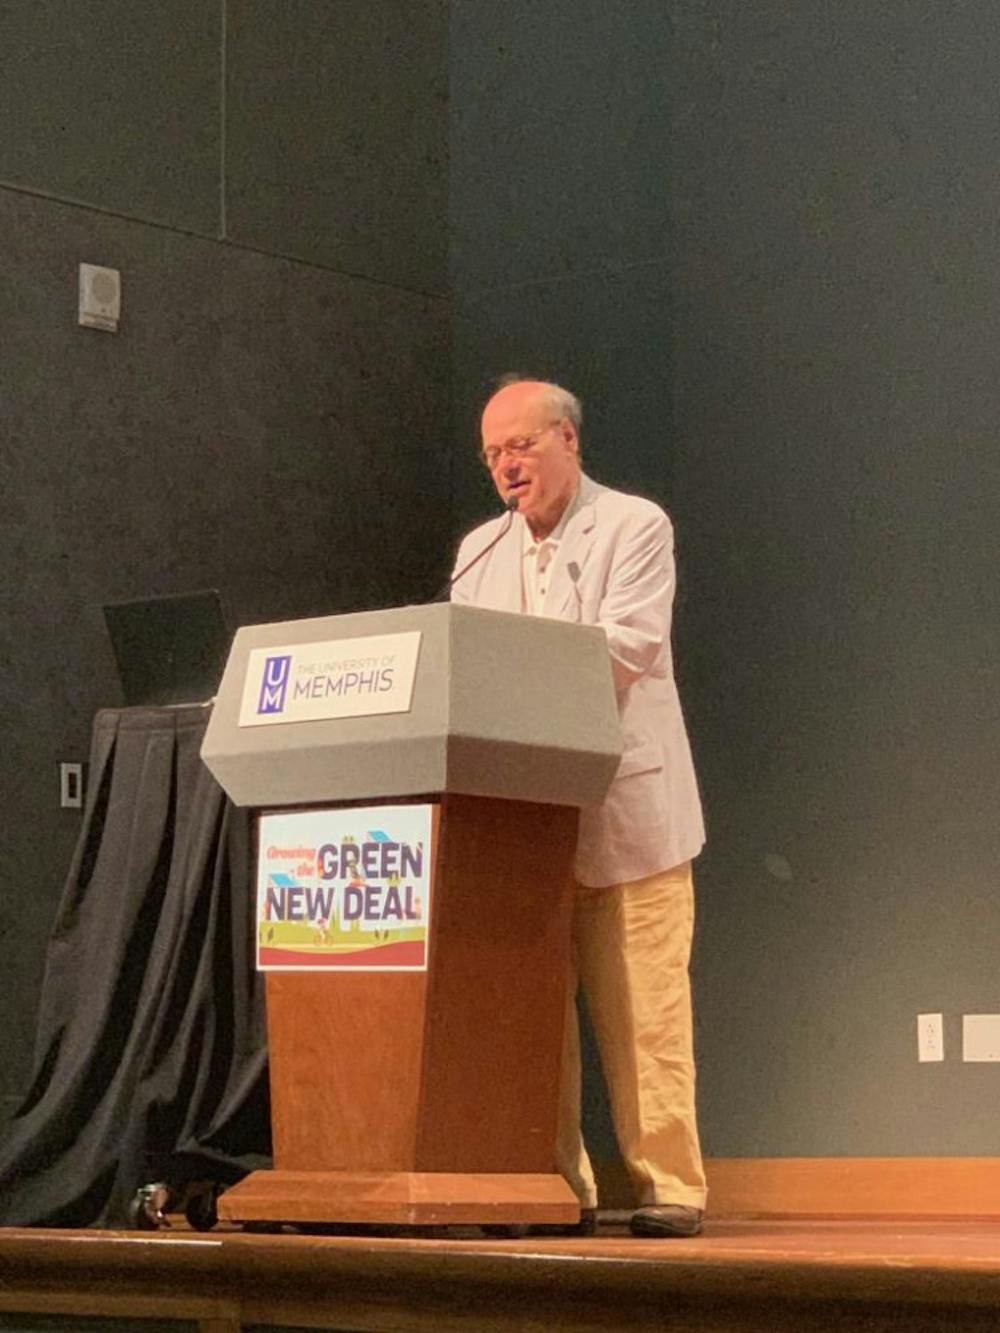 <p class="p1"><span class="s1">Congressman Steve Cohen spoke at the 16th Annual Environmental Justice Conference held in the UC Theatre on Oct. 5. Cohen discussed climate change among other issues.</span></p>